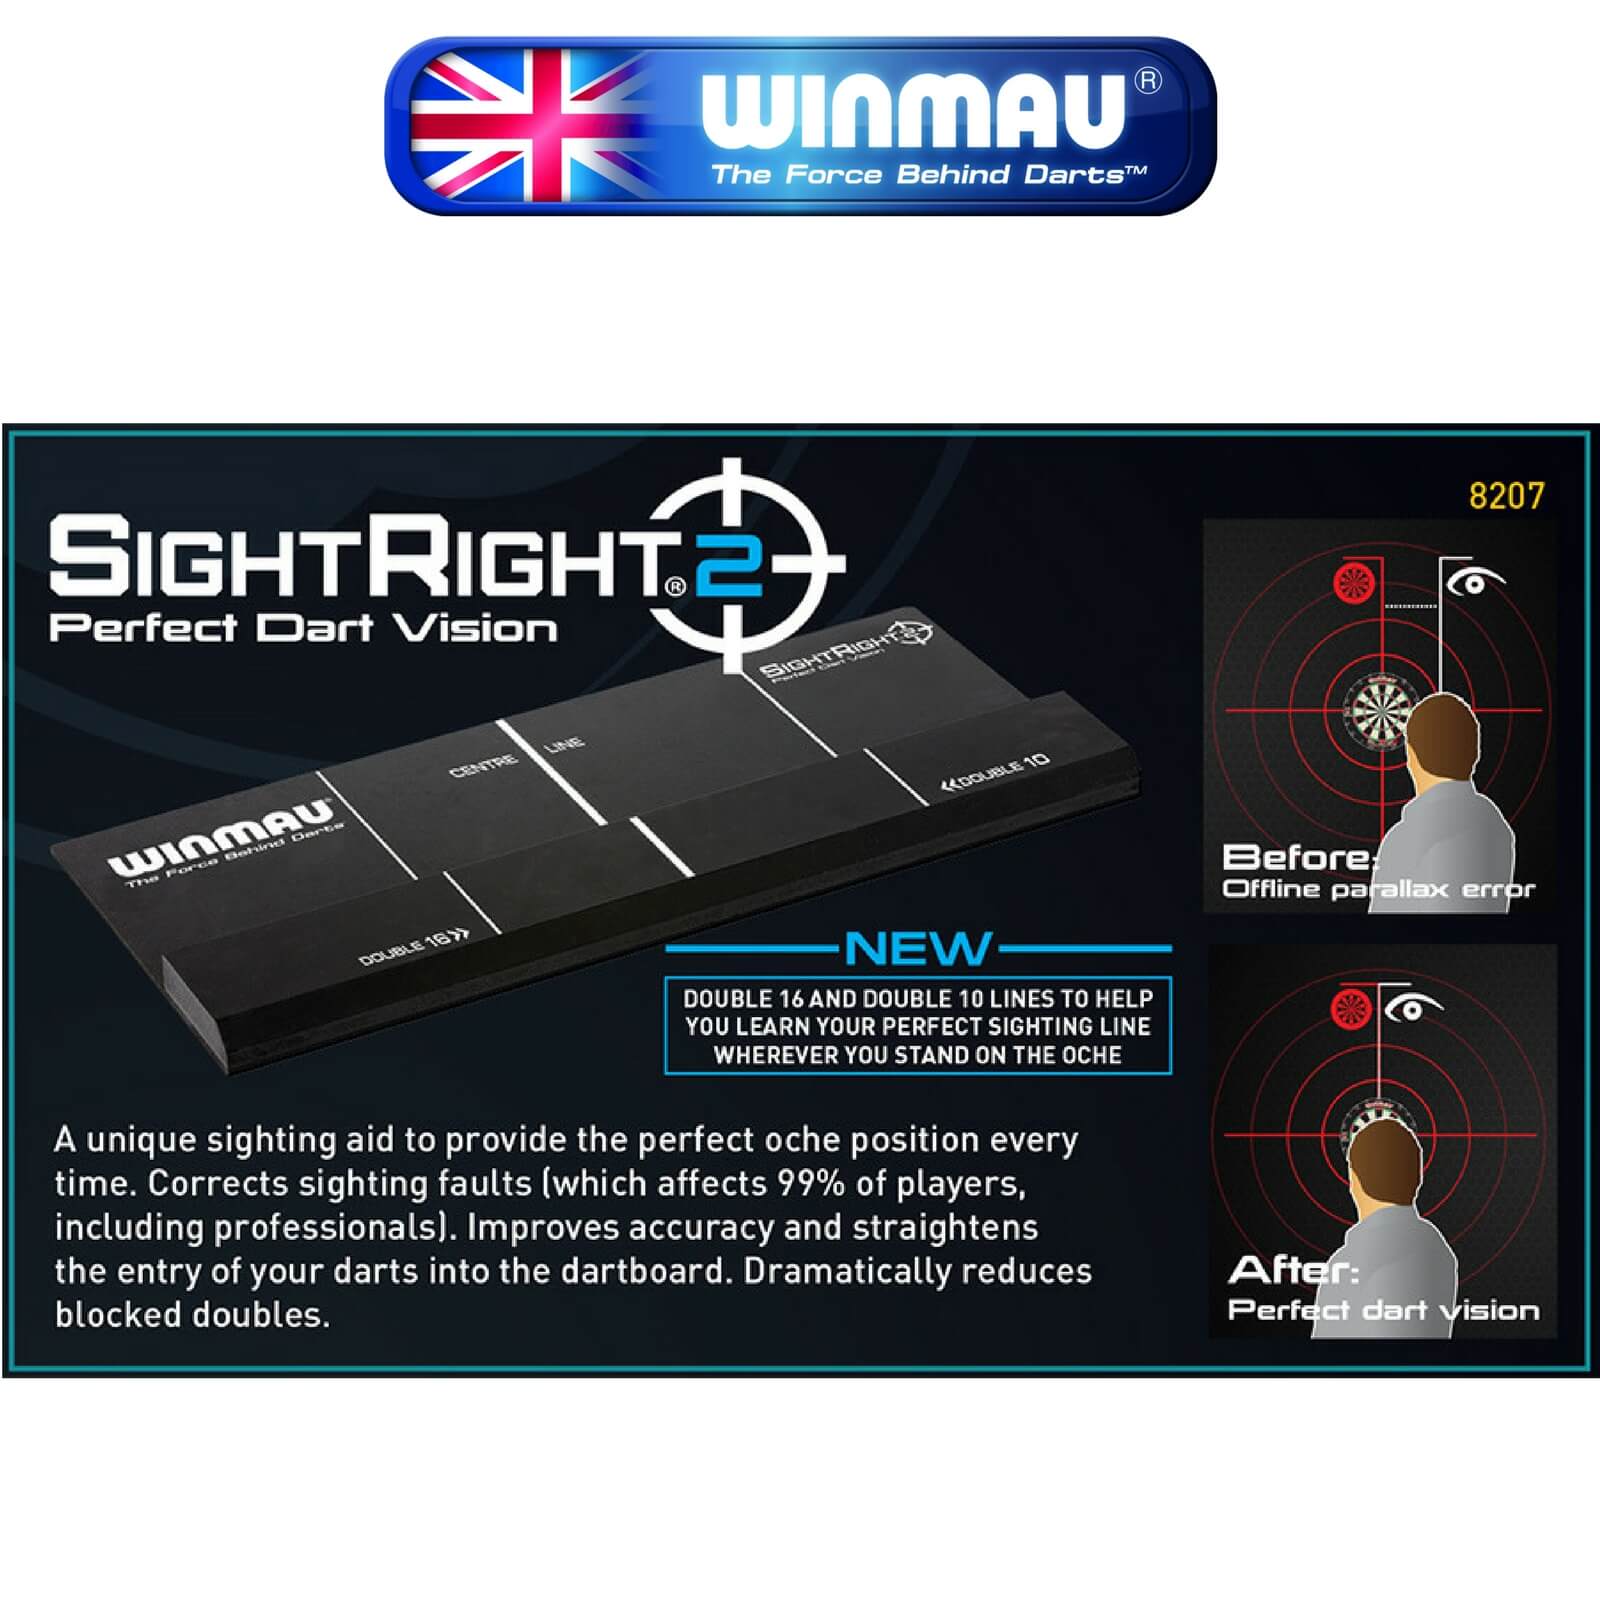 Training Accessories - Winmau - SightRight 2 - Darts Stance Alignment Tool 